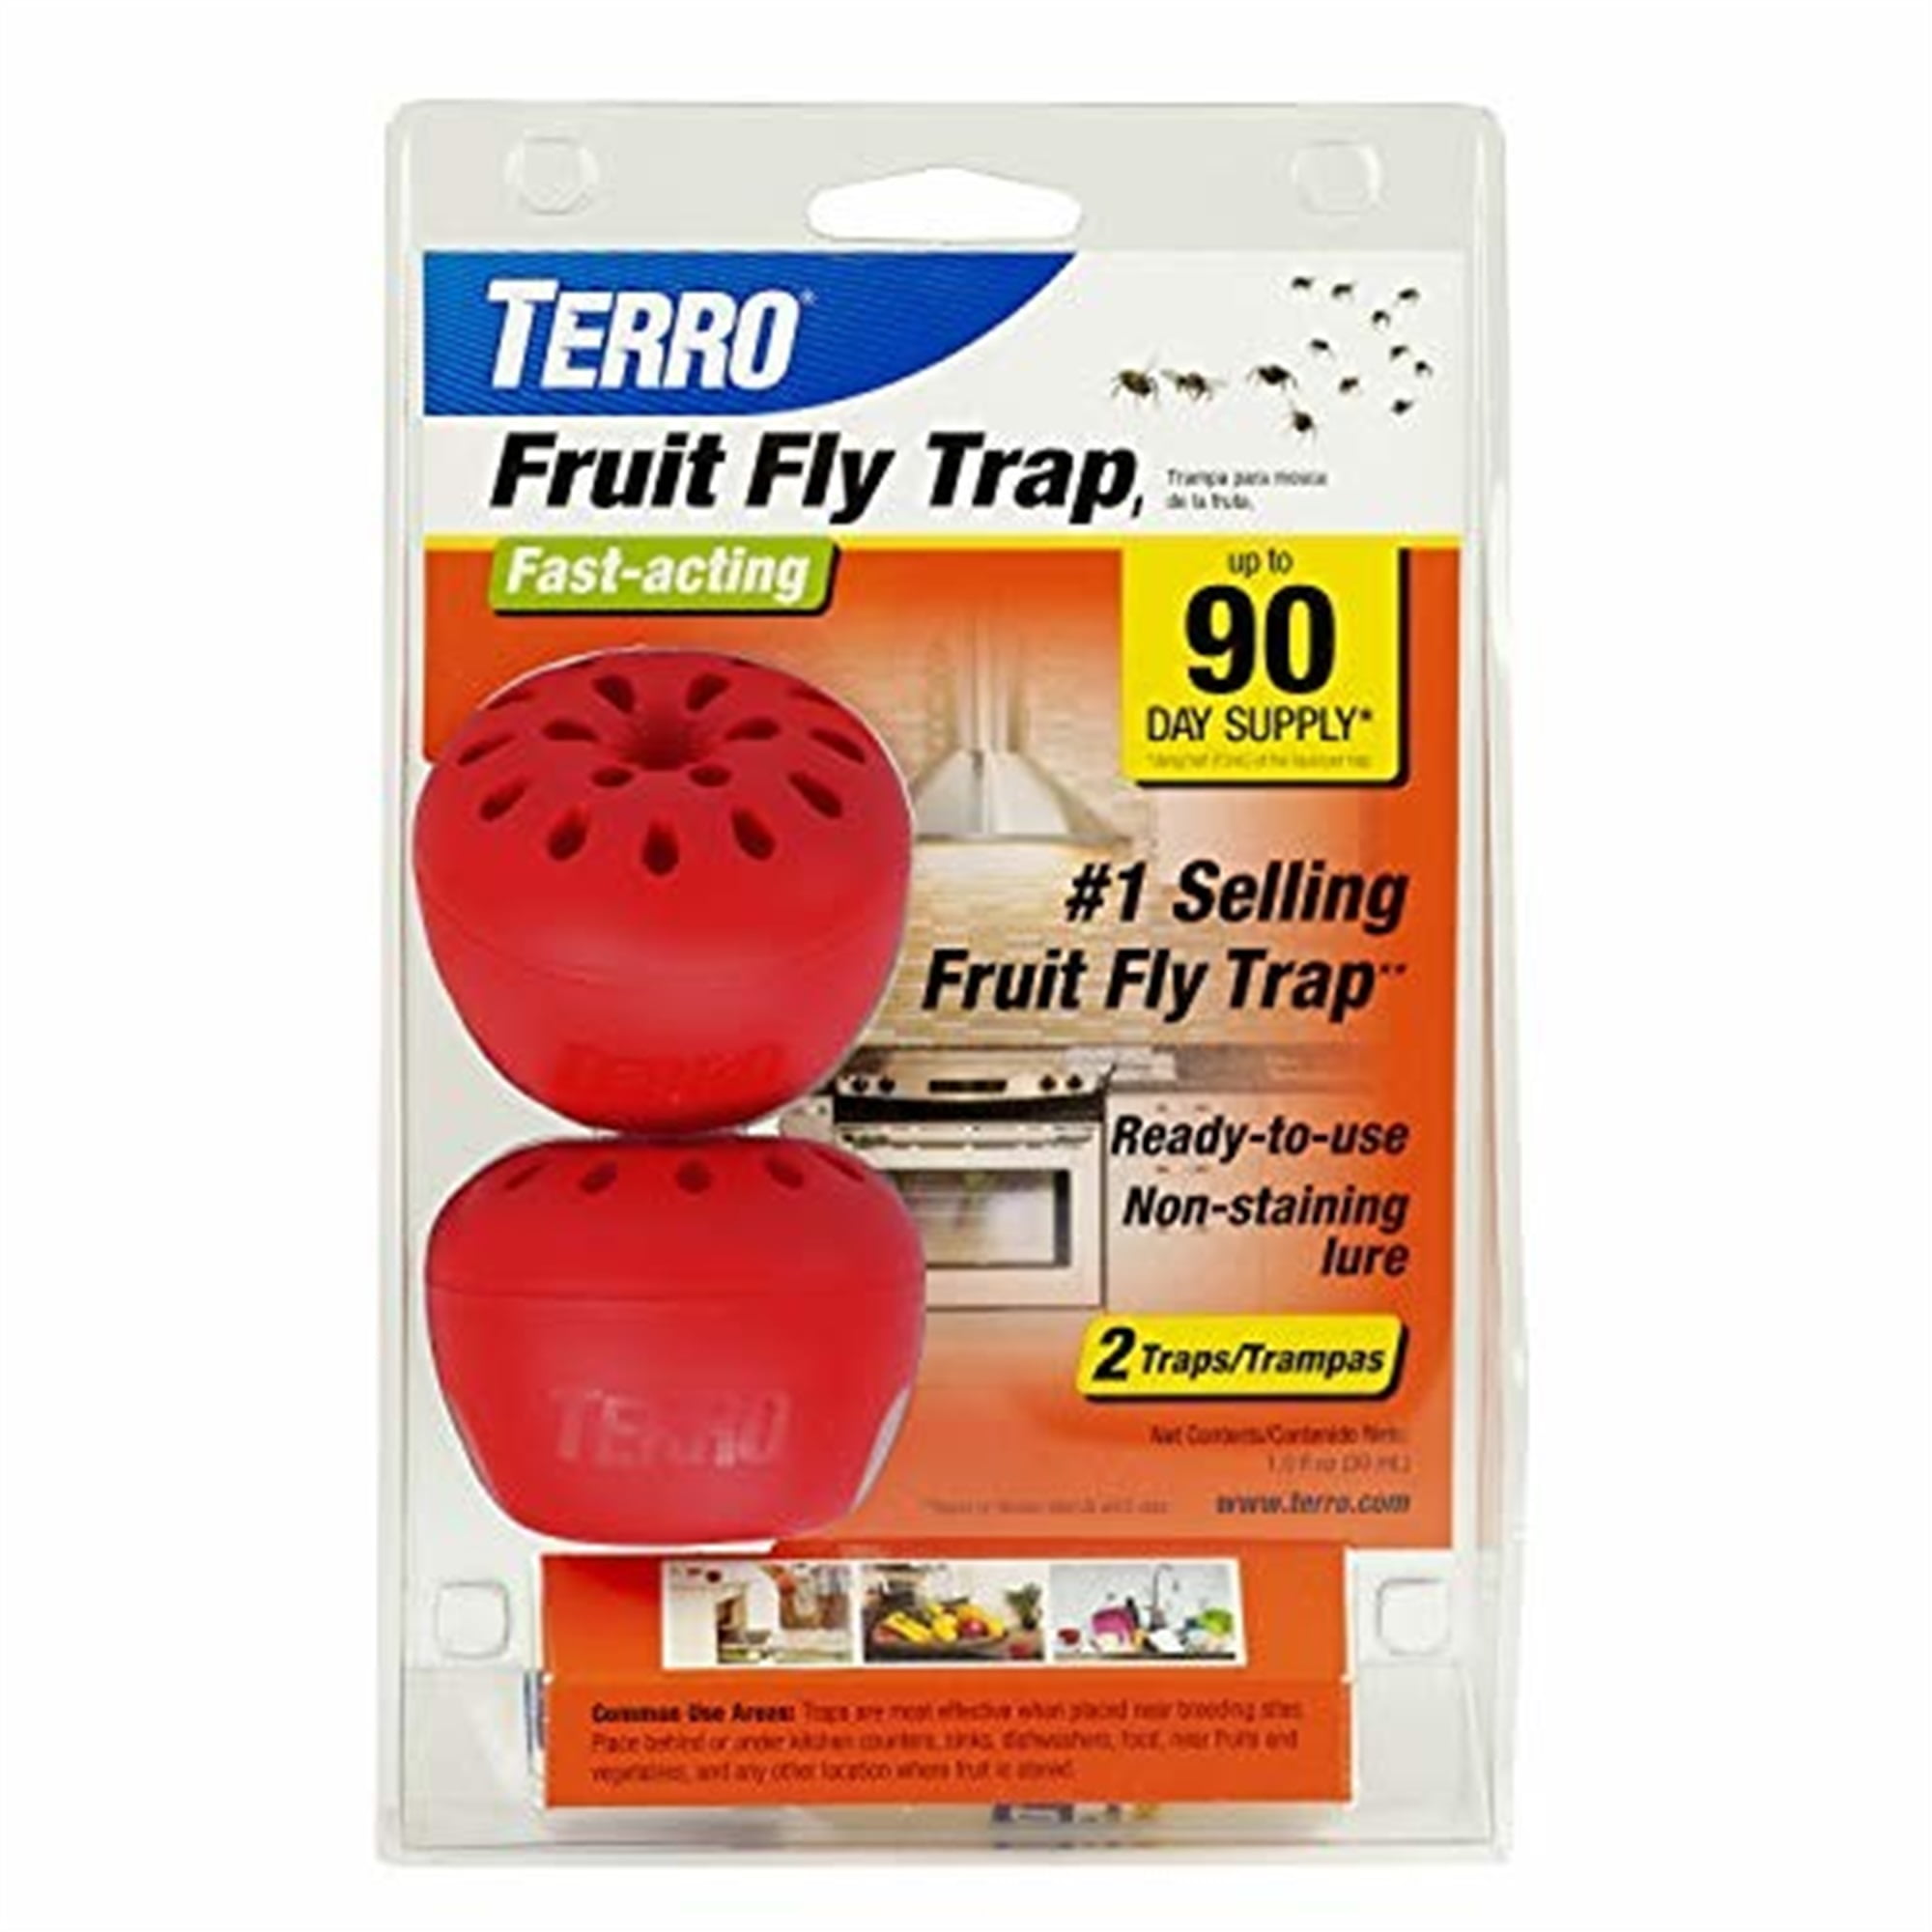 Enoz Ready-to-Use Fruit Fly Trap - Twin Pack – Willert Home Products